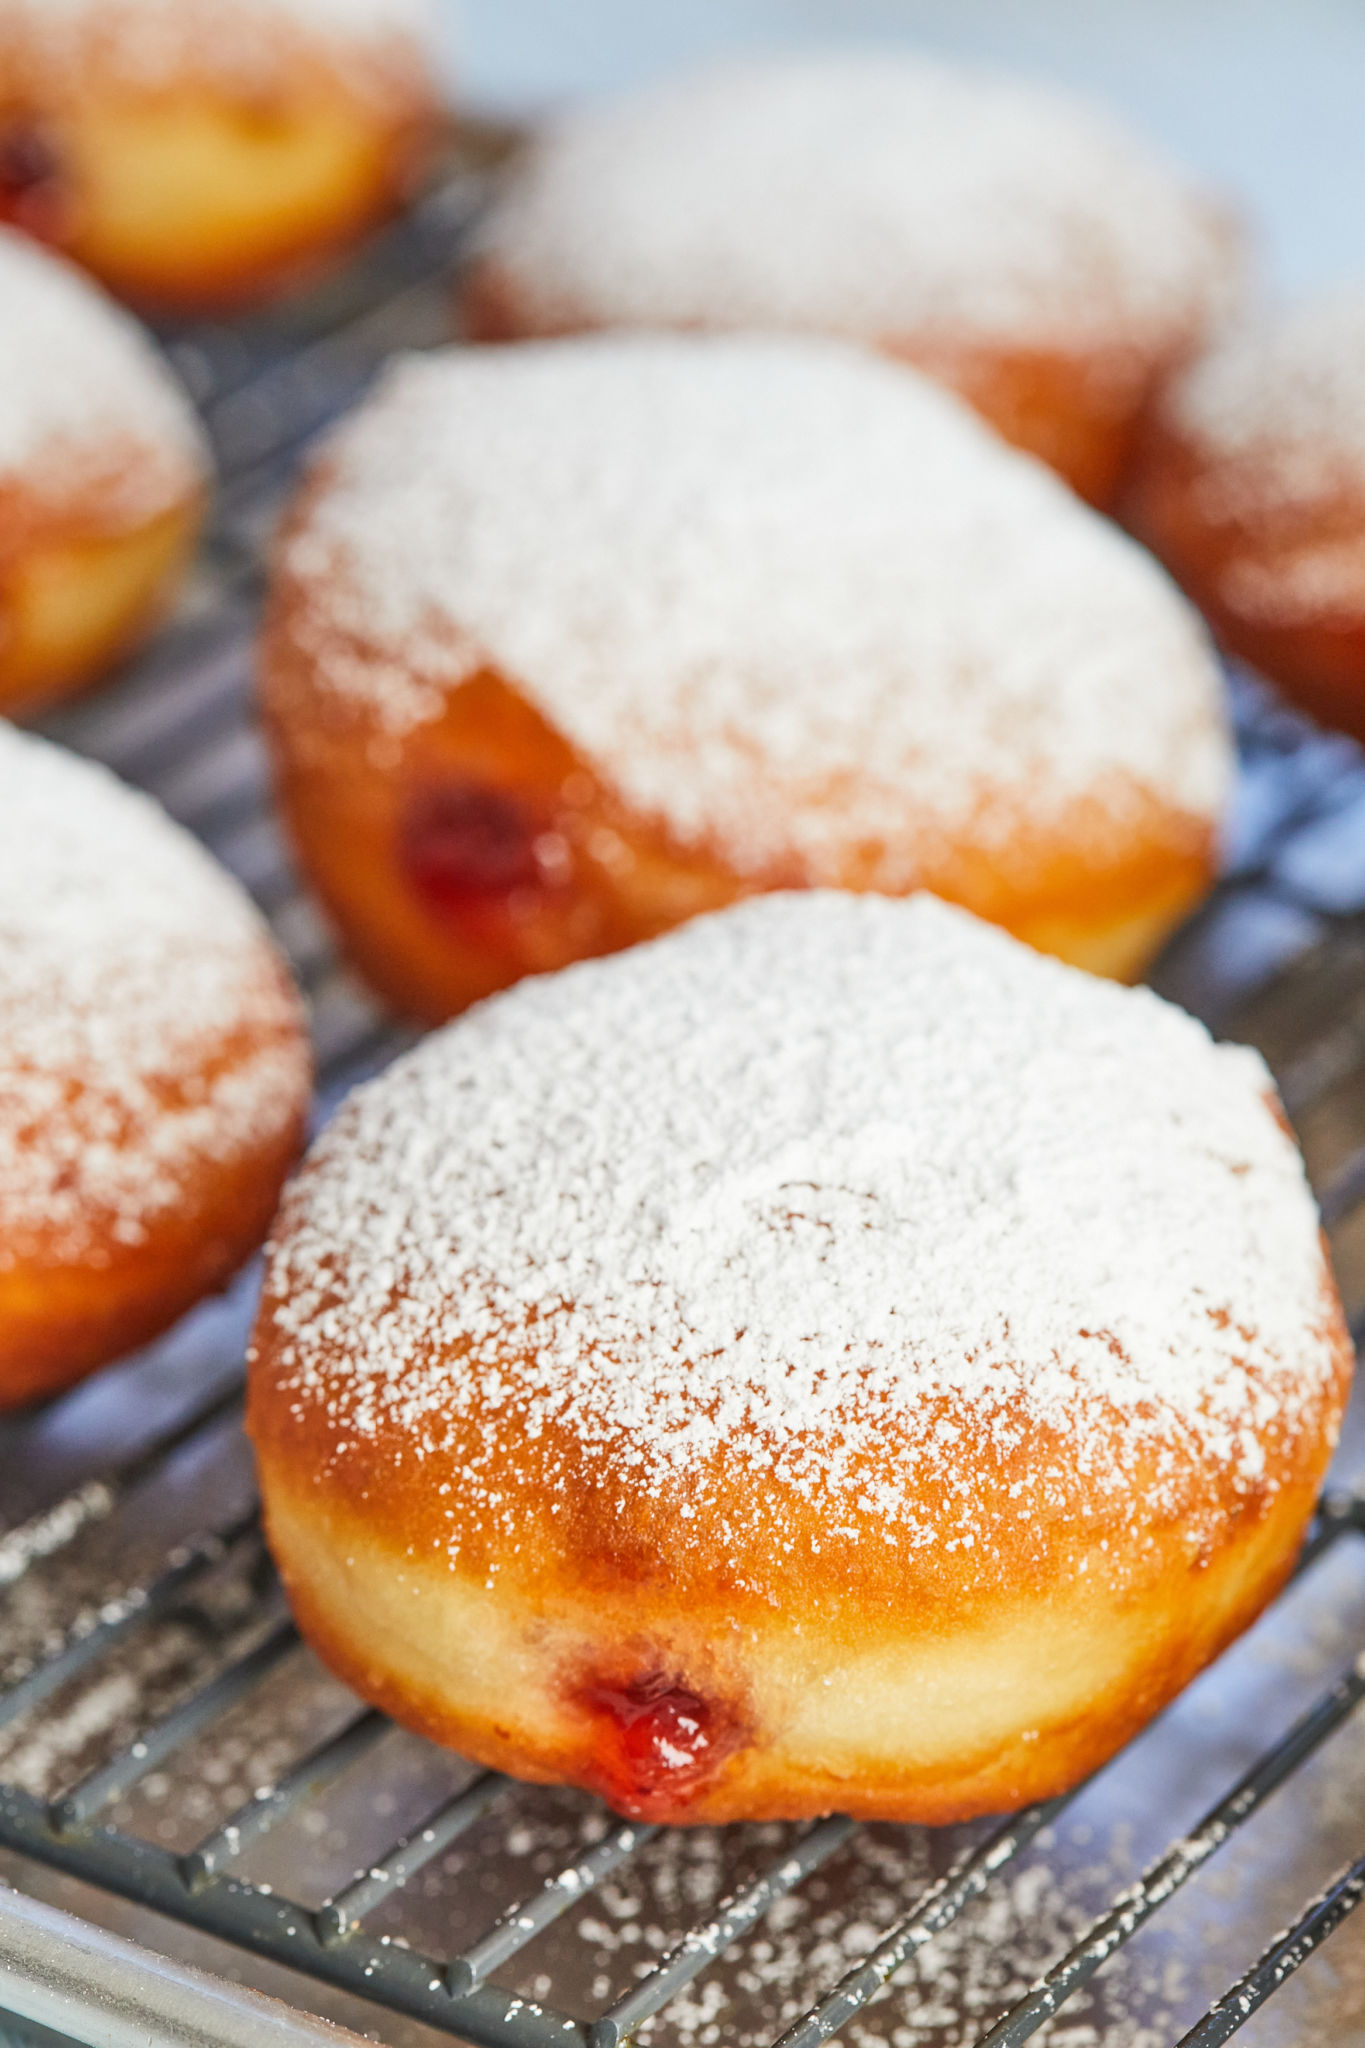 Hannukkah Jelly Donuts dusted with powdered sugar.